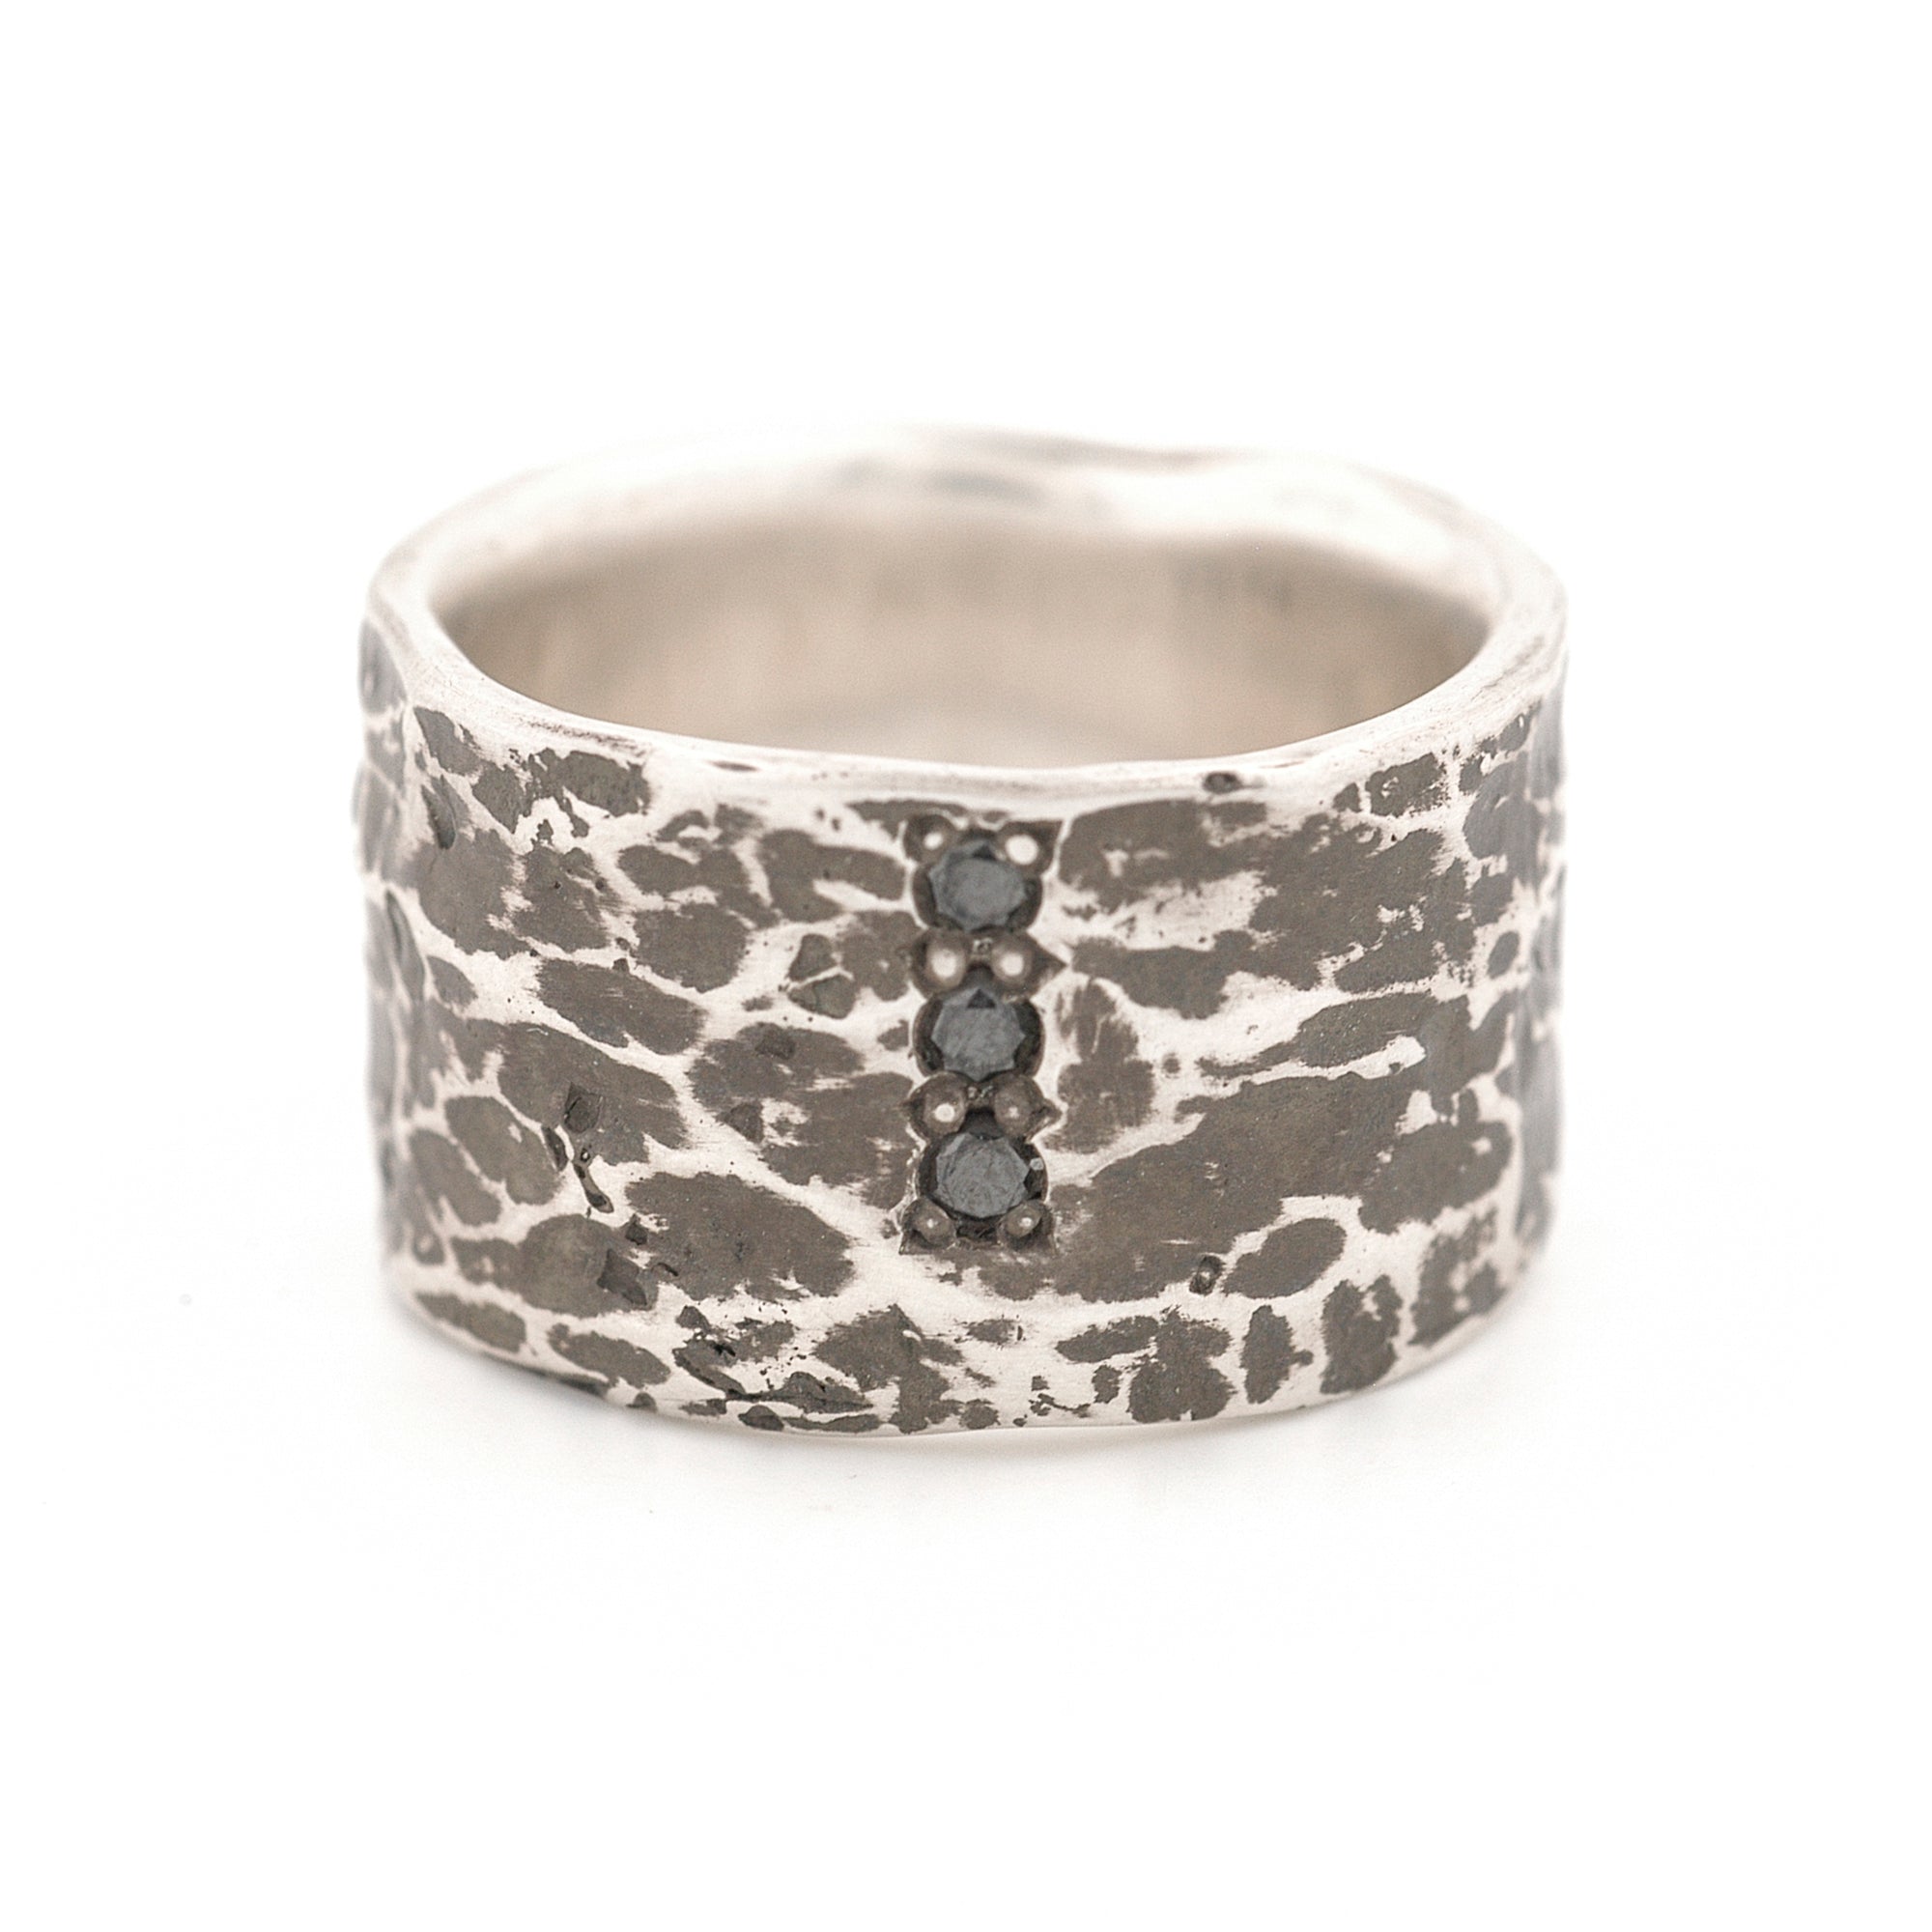 Wide Leather Texture Sterling Silver Ring with Black Diamonds